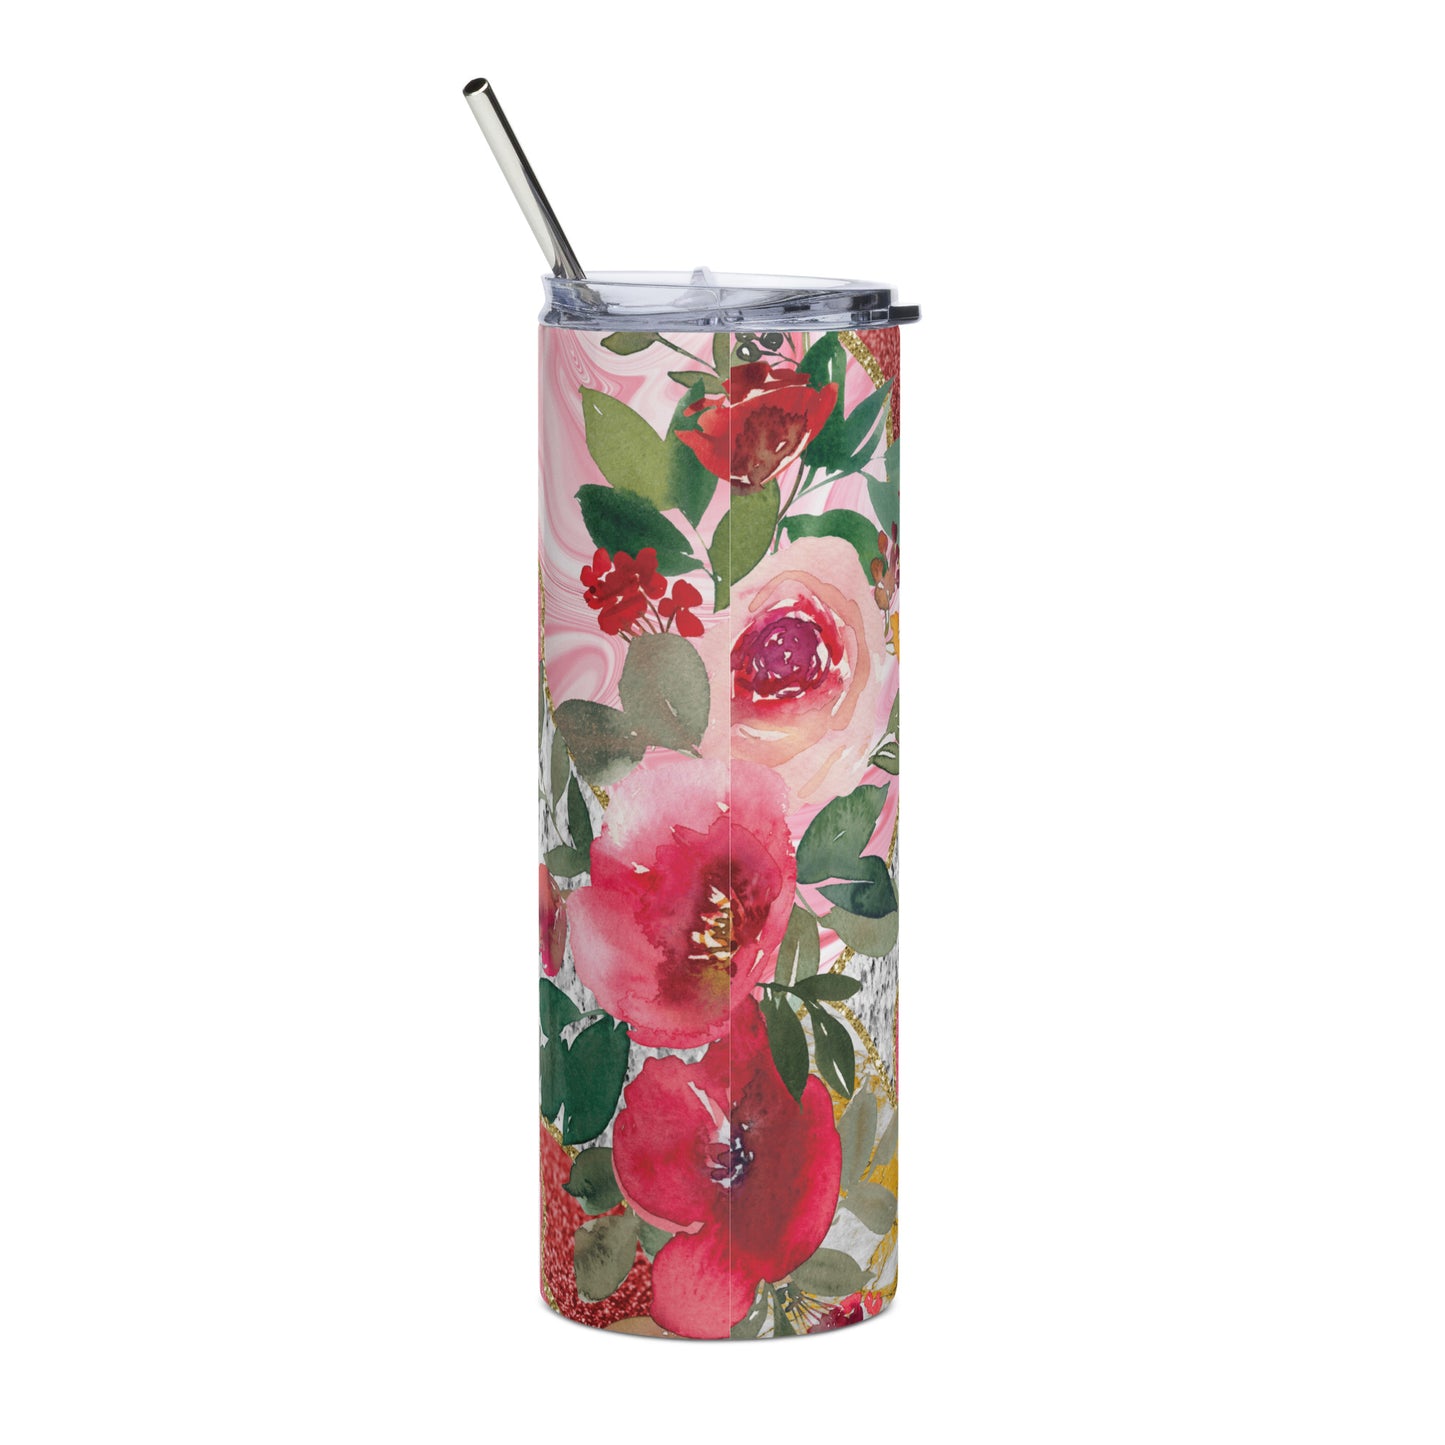 The back of the tumbler displays a smooth, high-grade stainless steel surface, ensuring durability and showcasing the beautiful simplicity of the "Love One Another" message.